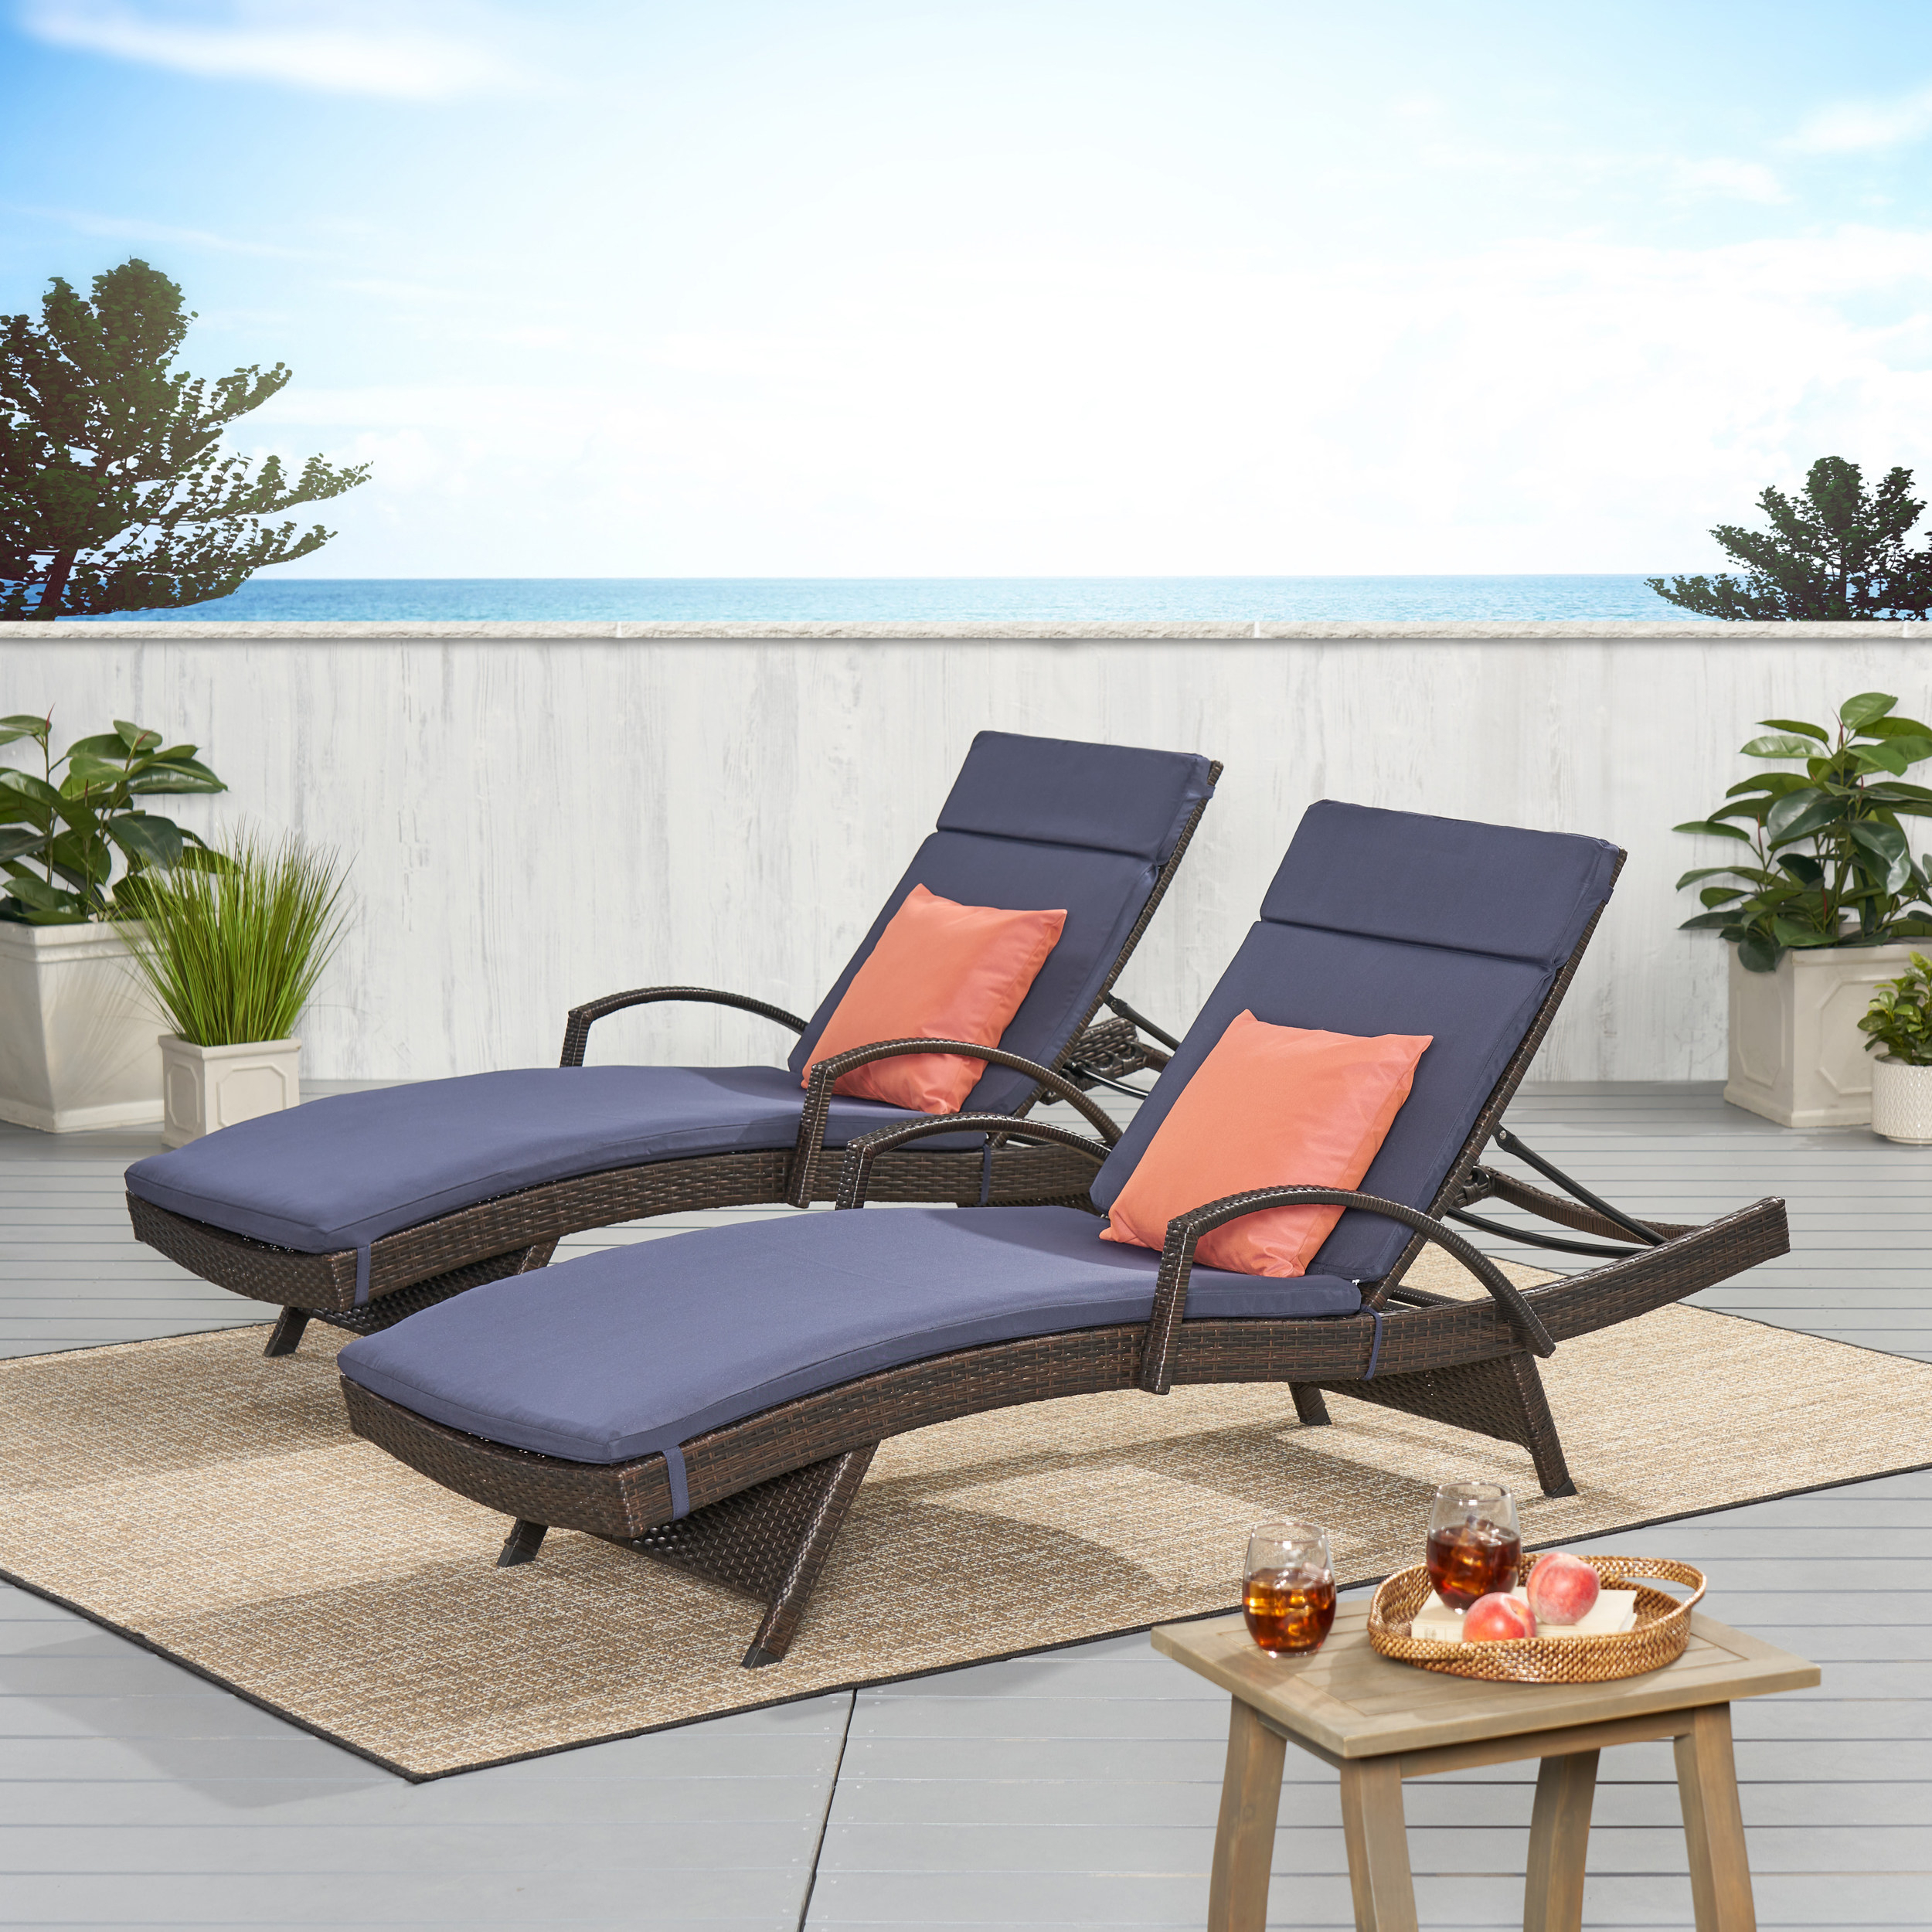 Lakeport Outdoor Wicker Armed Chaise Lounge Chairs With Cushions (set Of 2) - Navy Blue Cushion